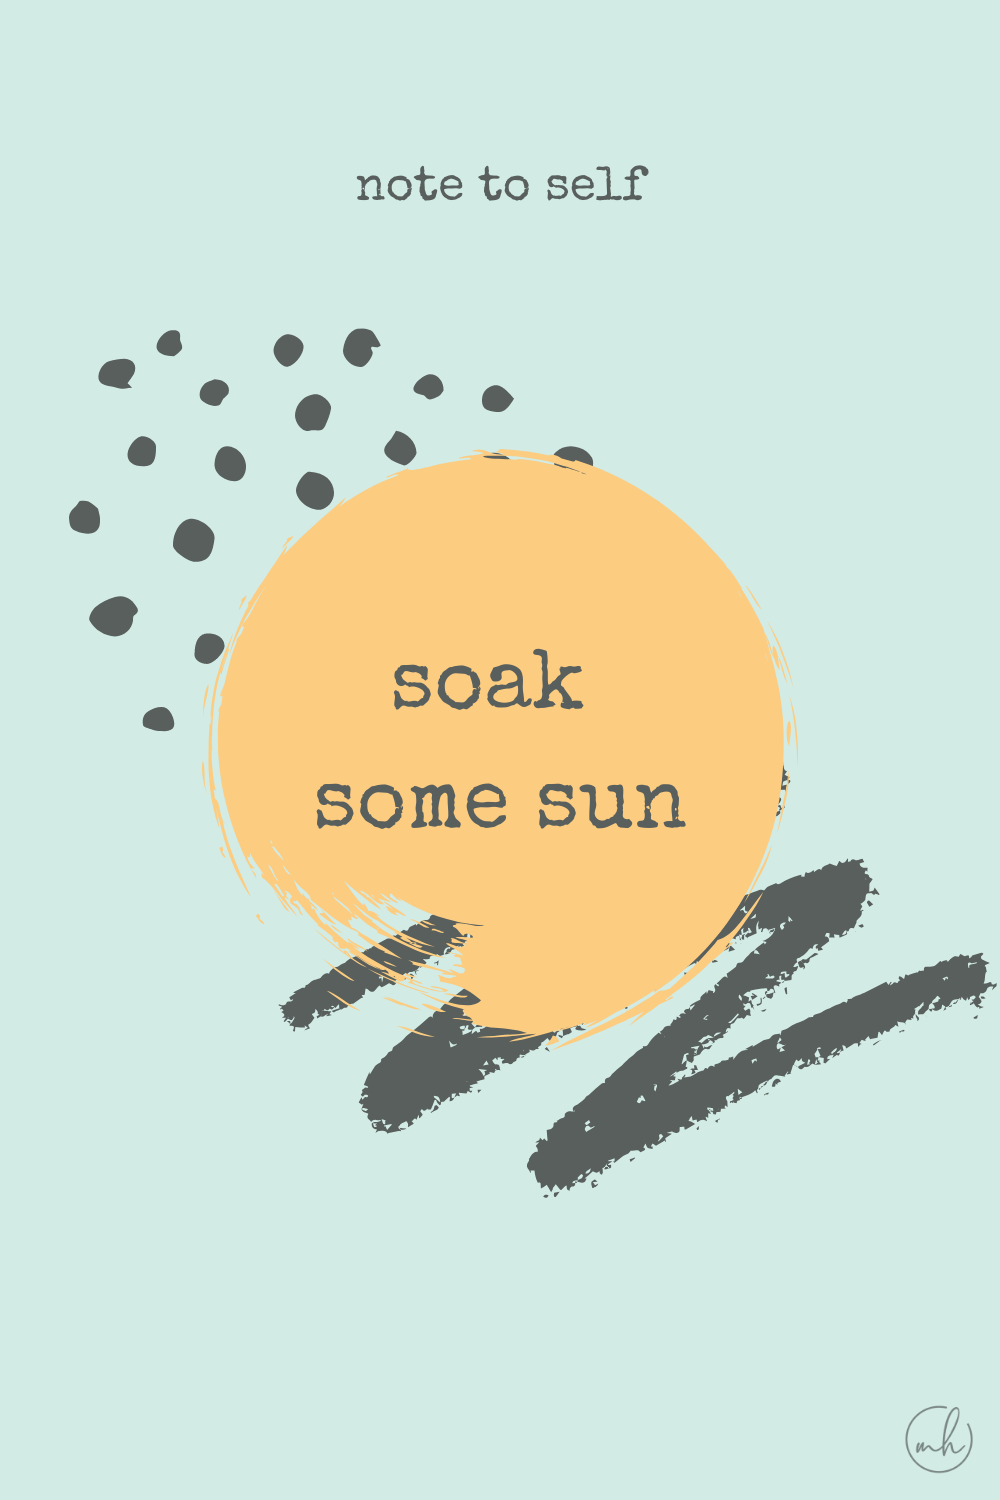 Soak some sun - Note to self quotes | myhoogah